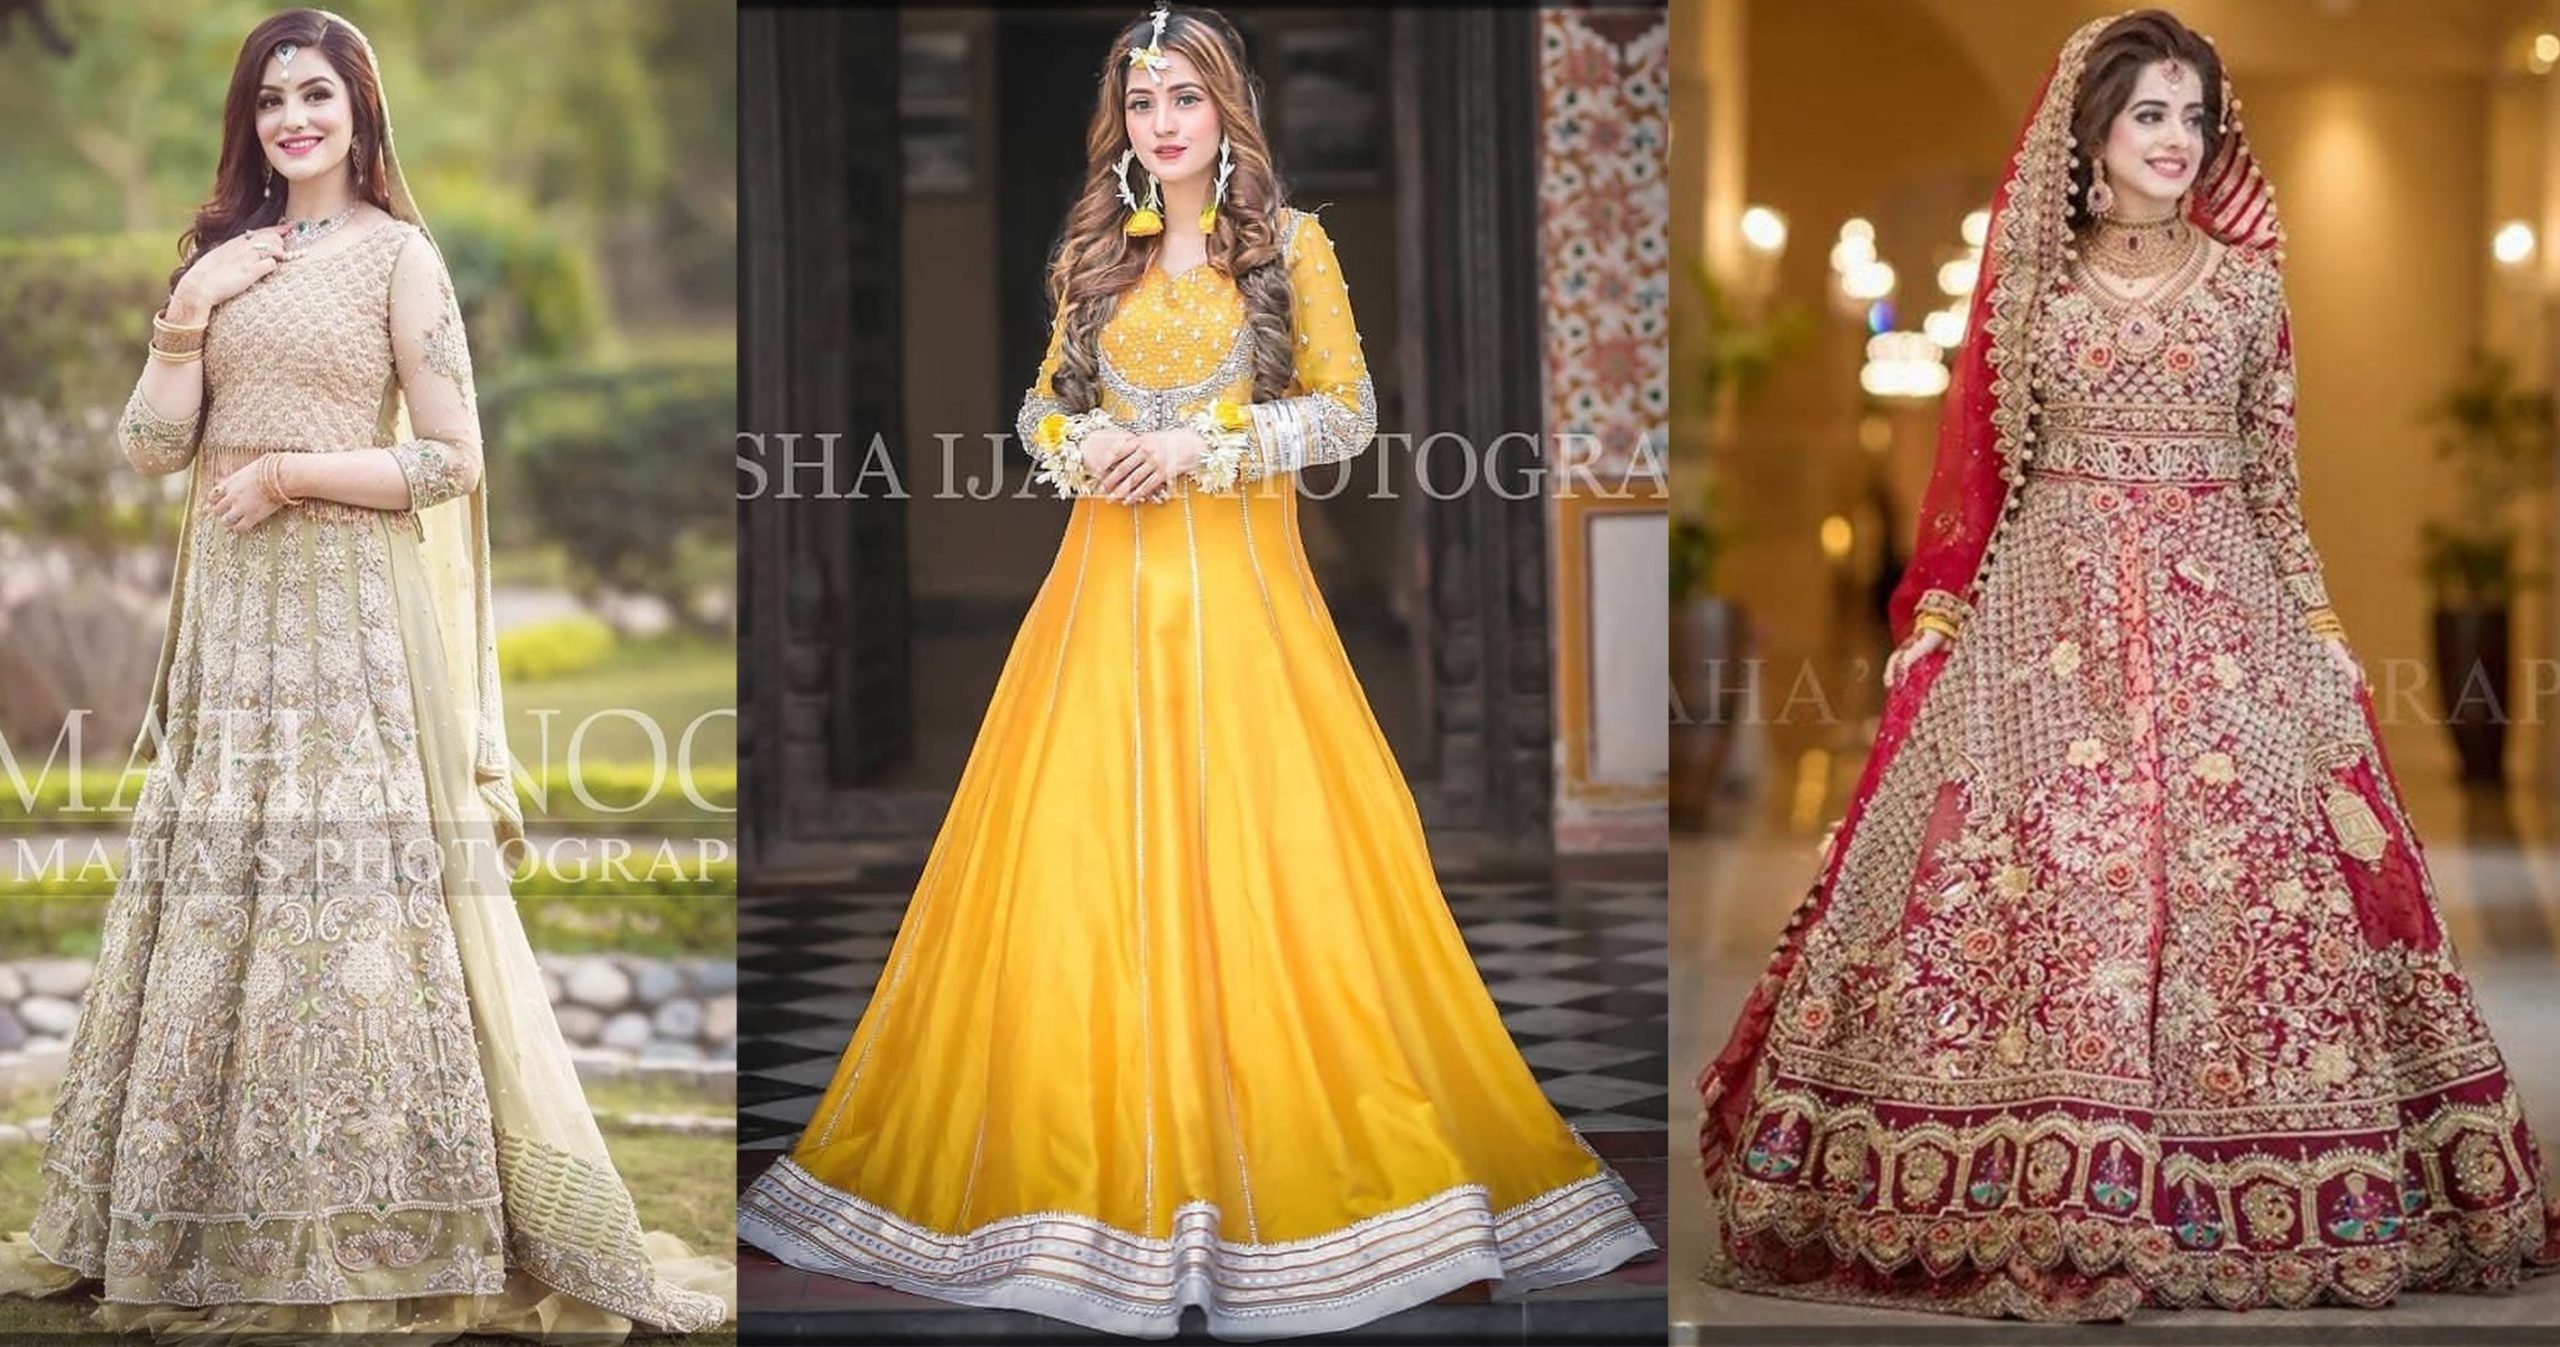 Latest Short peplum frock with formed lehenga for wedding brides in Pakistan   Indian fashion dresses Indian bridal dress Bridal dresses pakistan